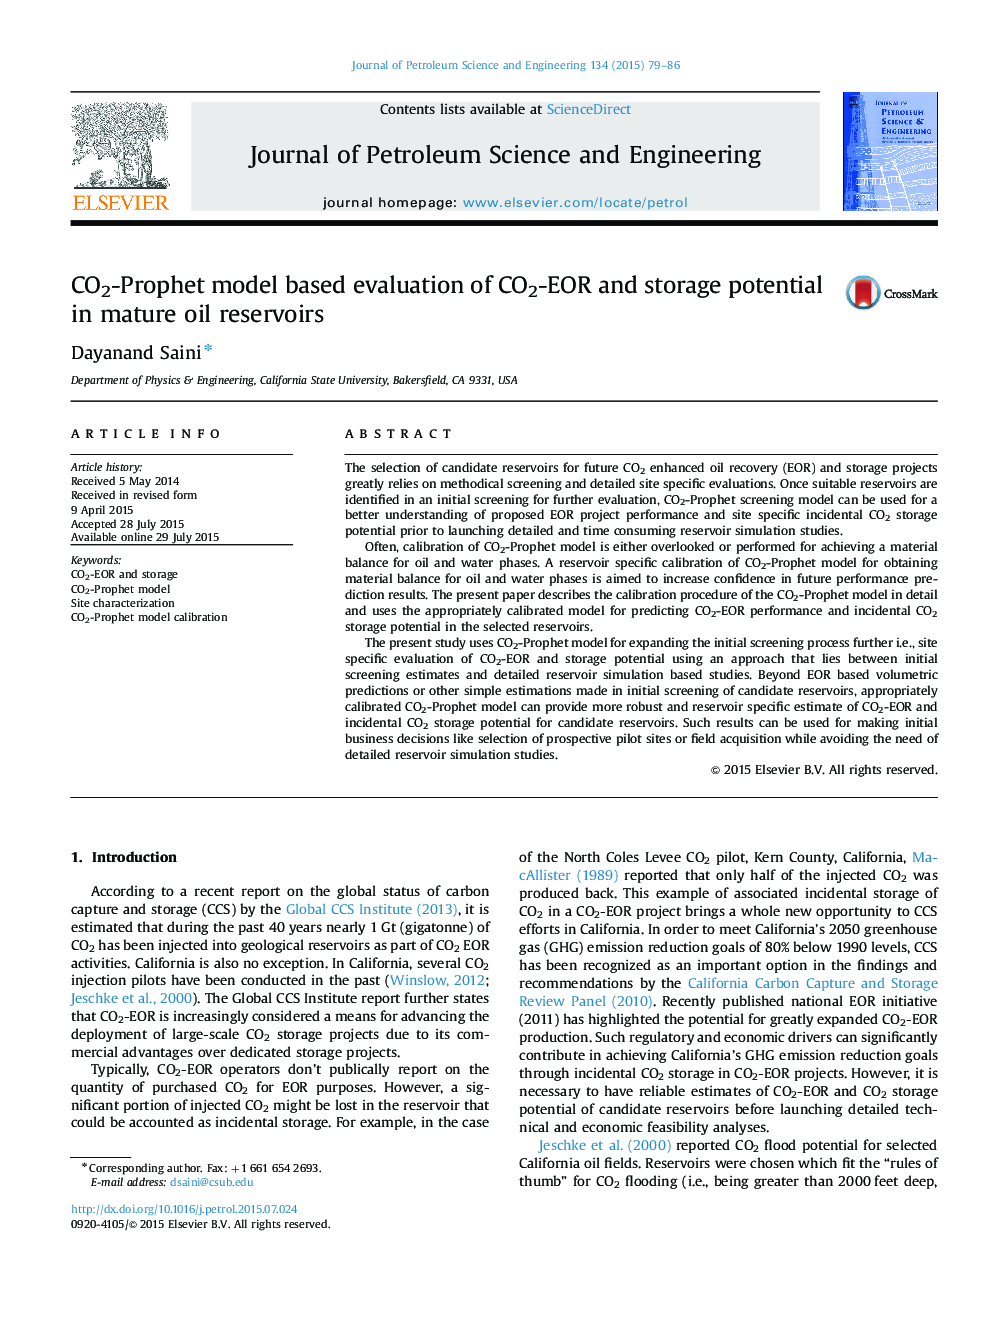 CO2-Prophet model based evaluation of CO2-EOR and storage potential in mature oil reservoirs